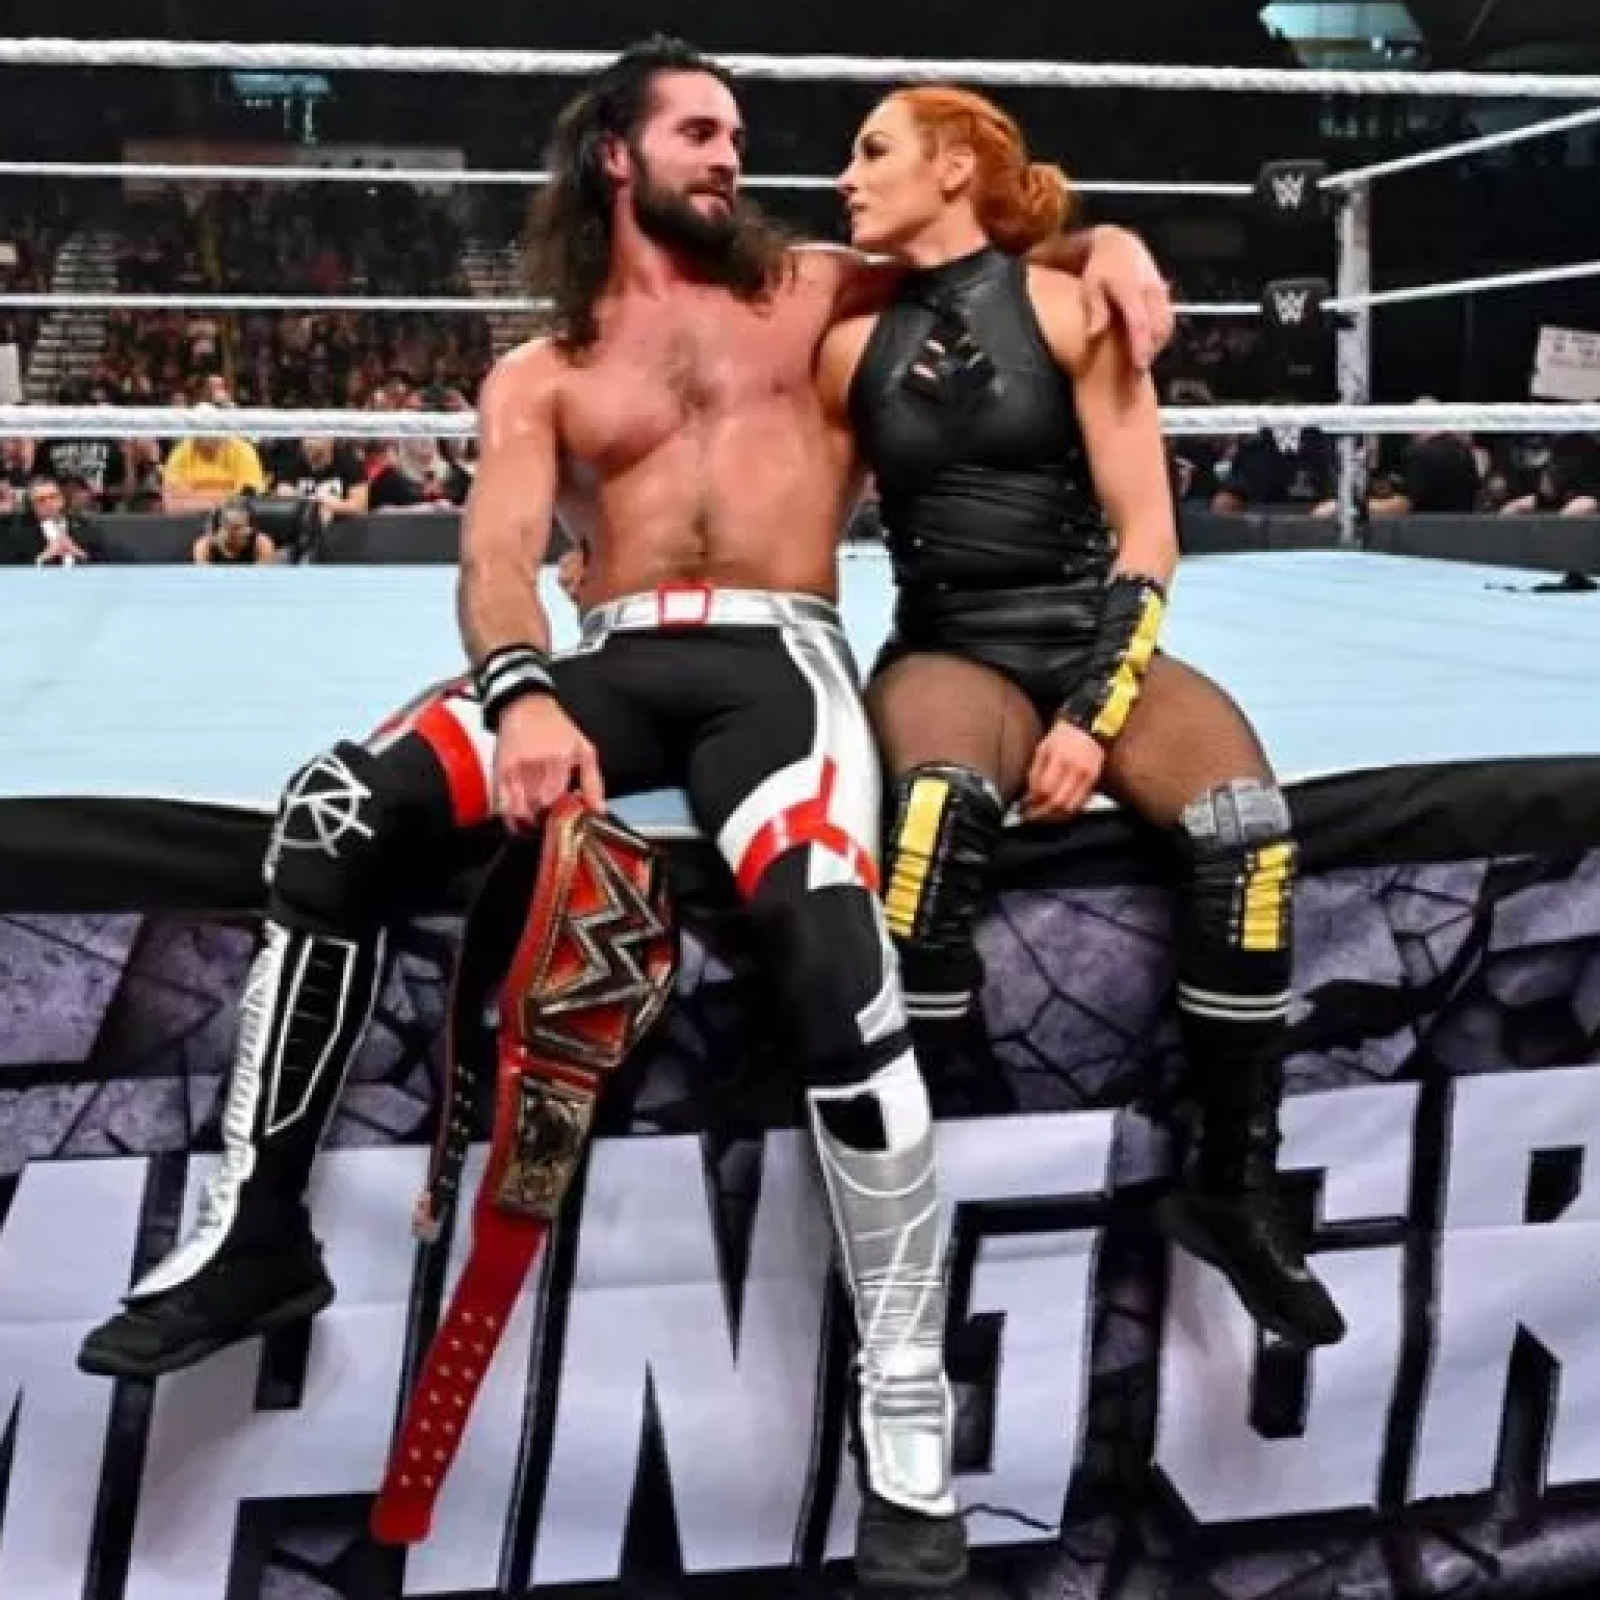 What Does Becky Lynch and Seth Rollins' Baby Name Mean?